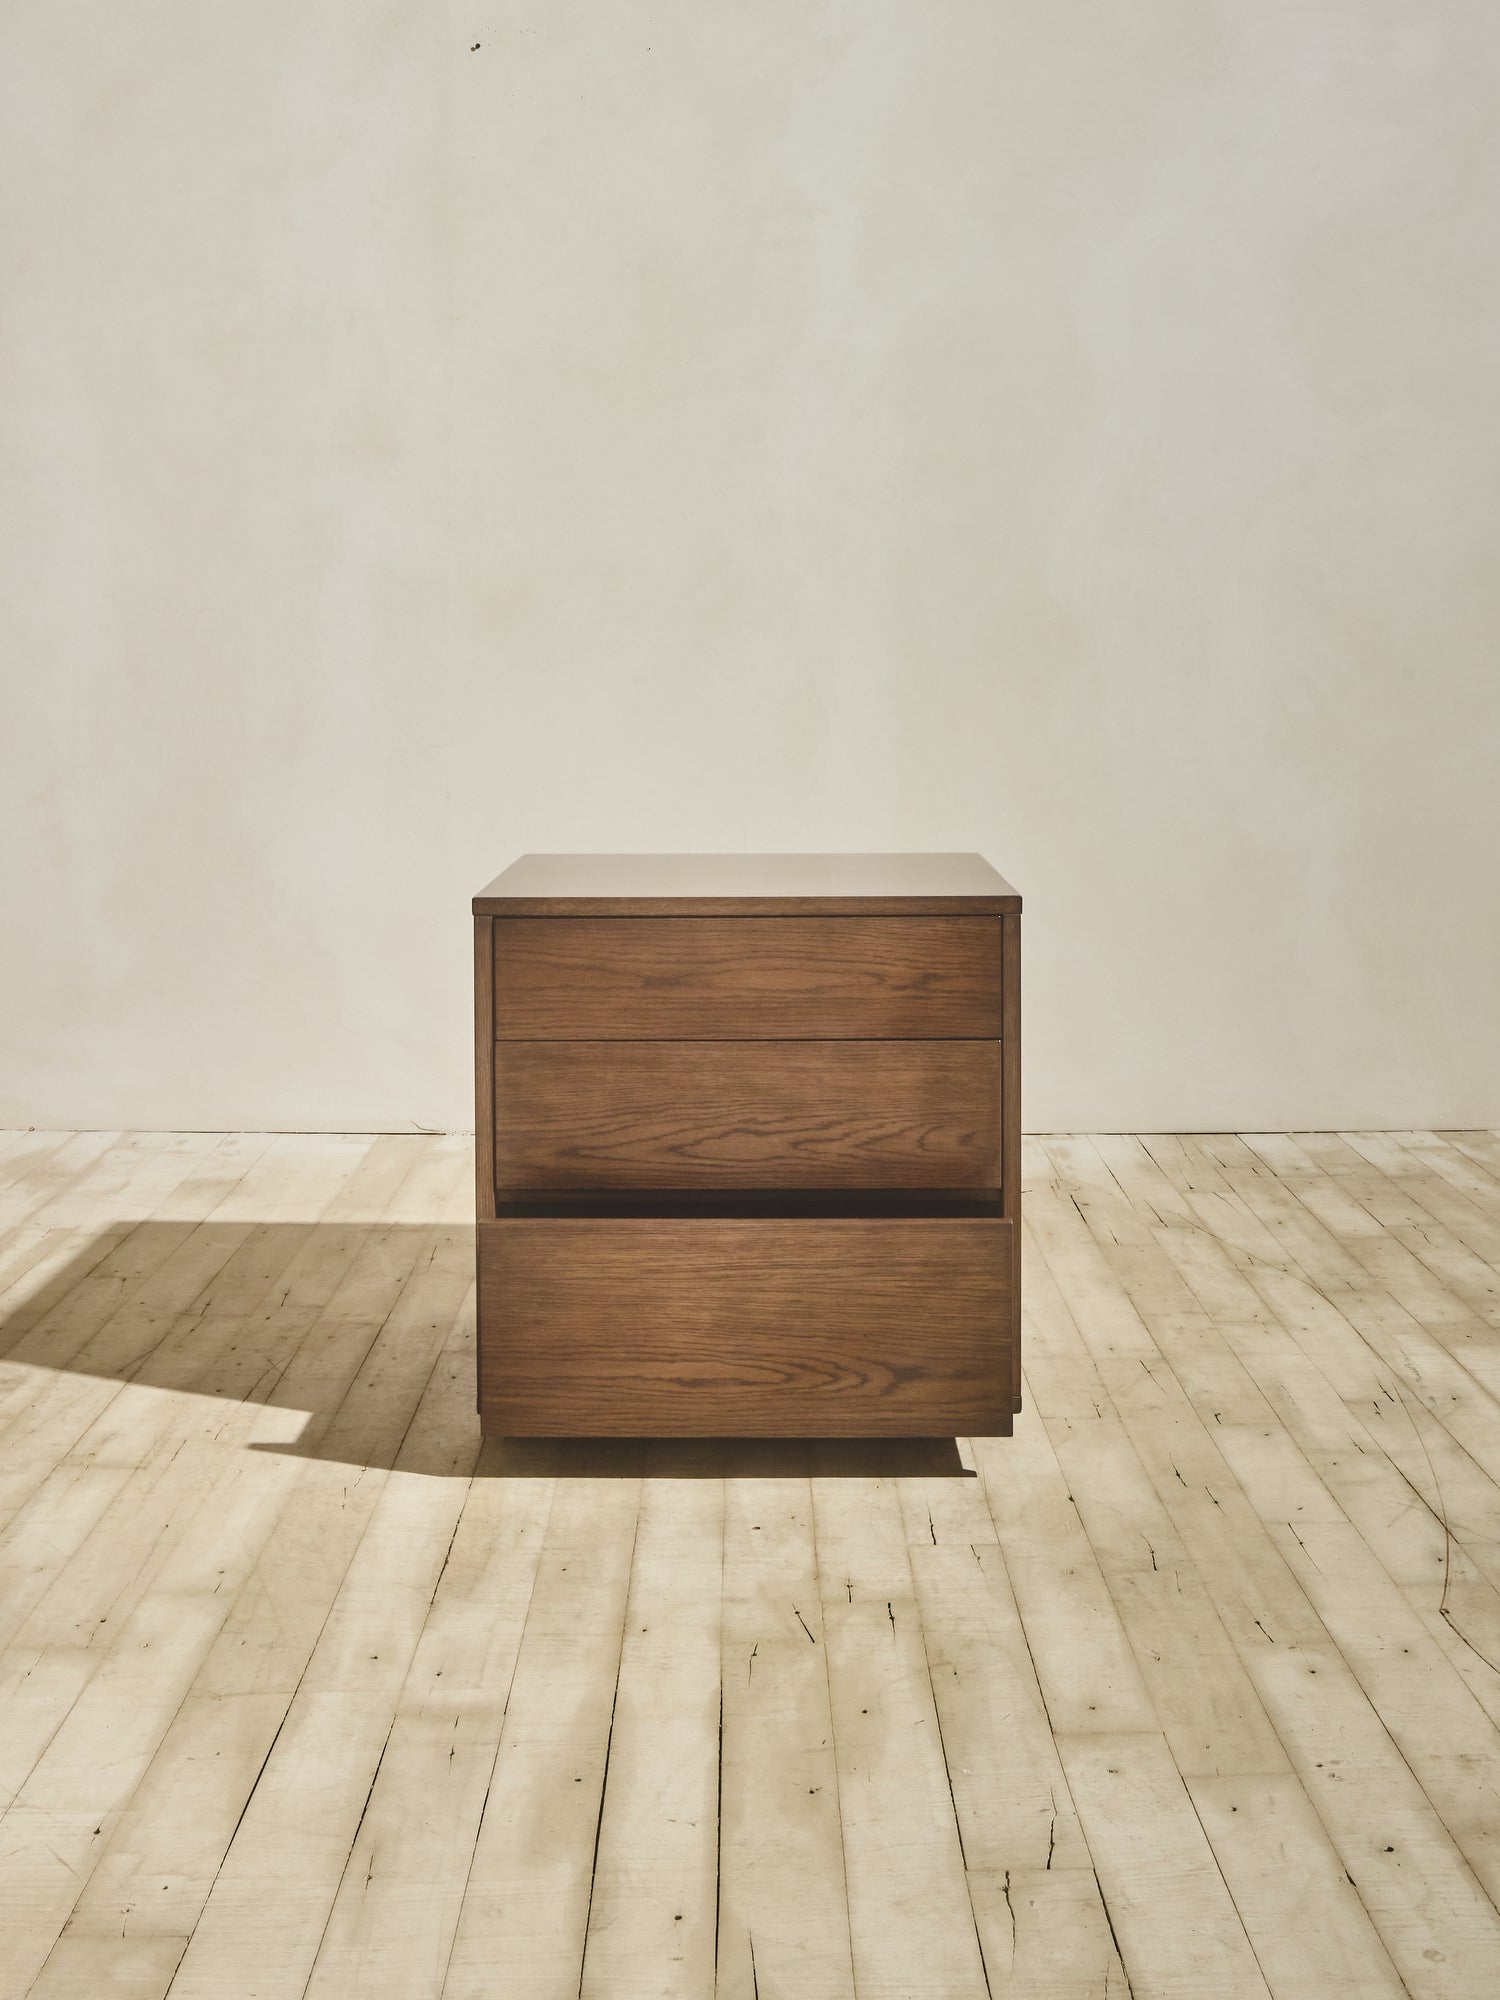 Minimalist Ghent Side Table in natural finish with opened drawer.